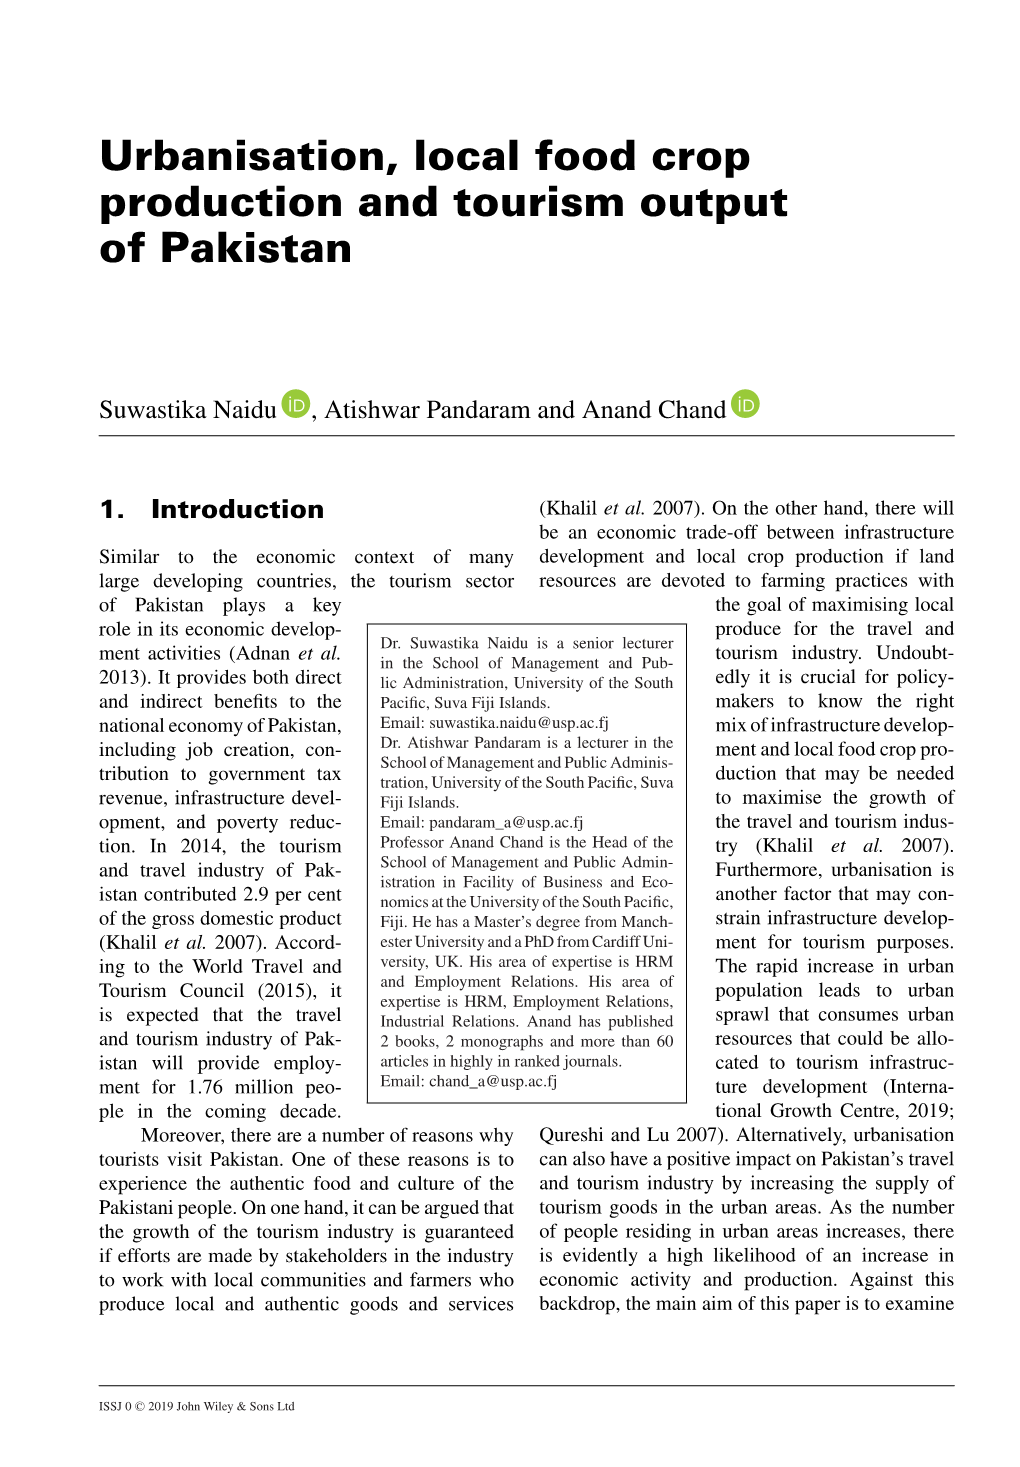 Urbanisation, Local Food Crop Production and Tourism Output of Pakistan